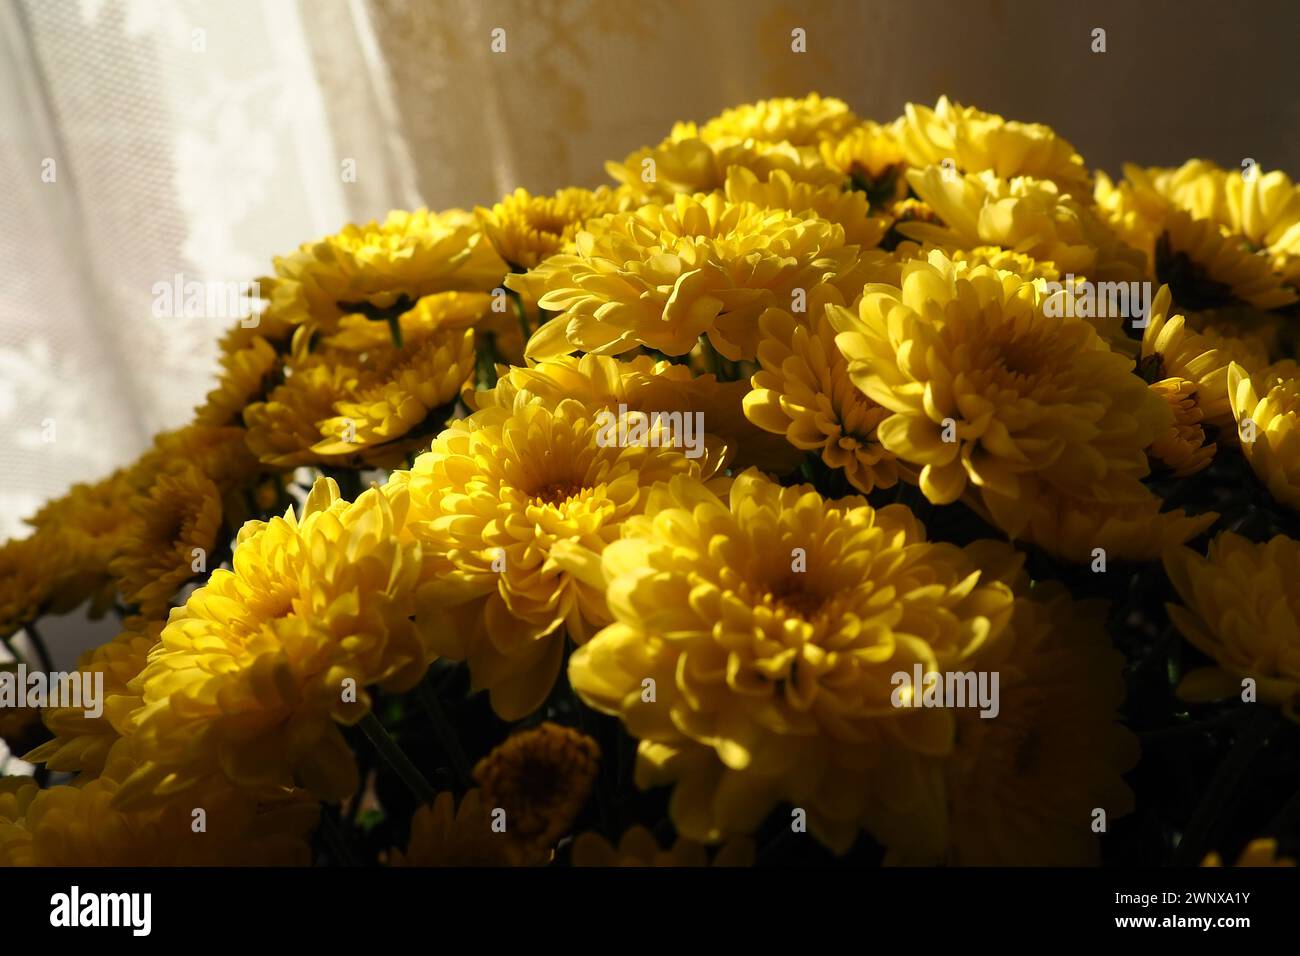 Chrysanthemums of yellow color in a bouquet. Close-up texture. Greeting card for wedding or birthday. Autumn flowers from the family Asteraceae or Stock Photo